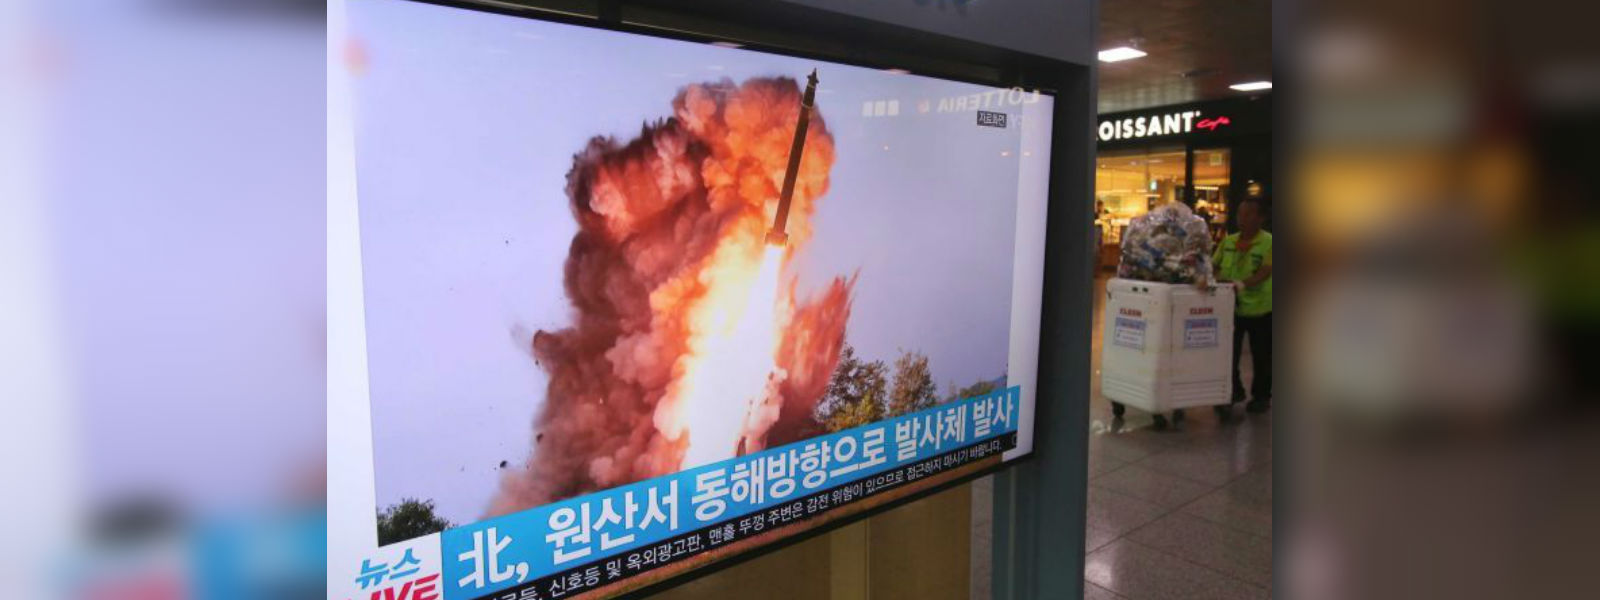 North Korea’s state TV releases photos of latest missile test